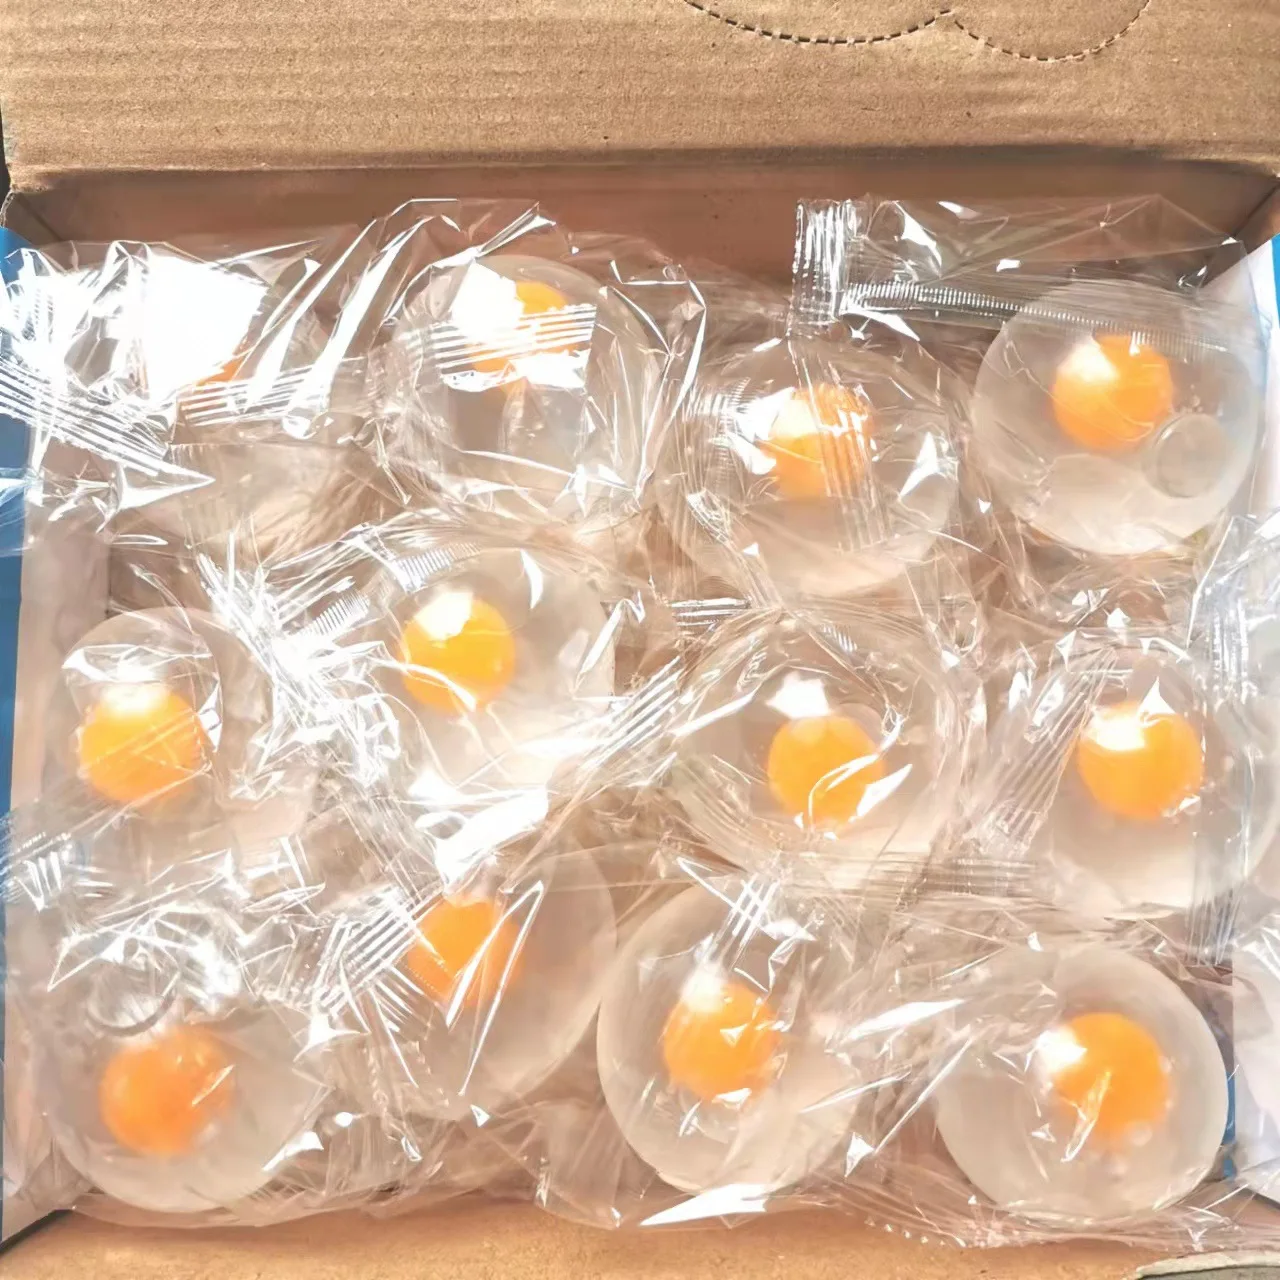 Transparent Anti Stress Egg Water Ball Relief Toys Novelty Ball Fun Splat Venting 10ml Mood Reliever Sensory Toys